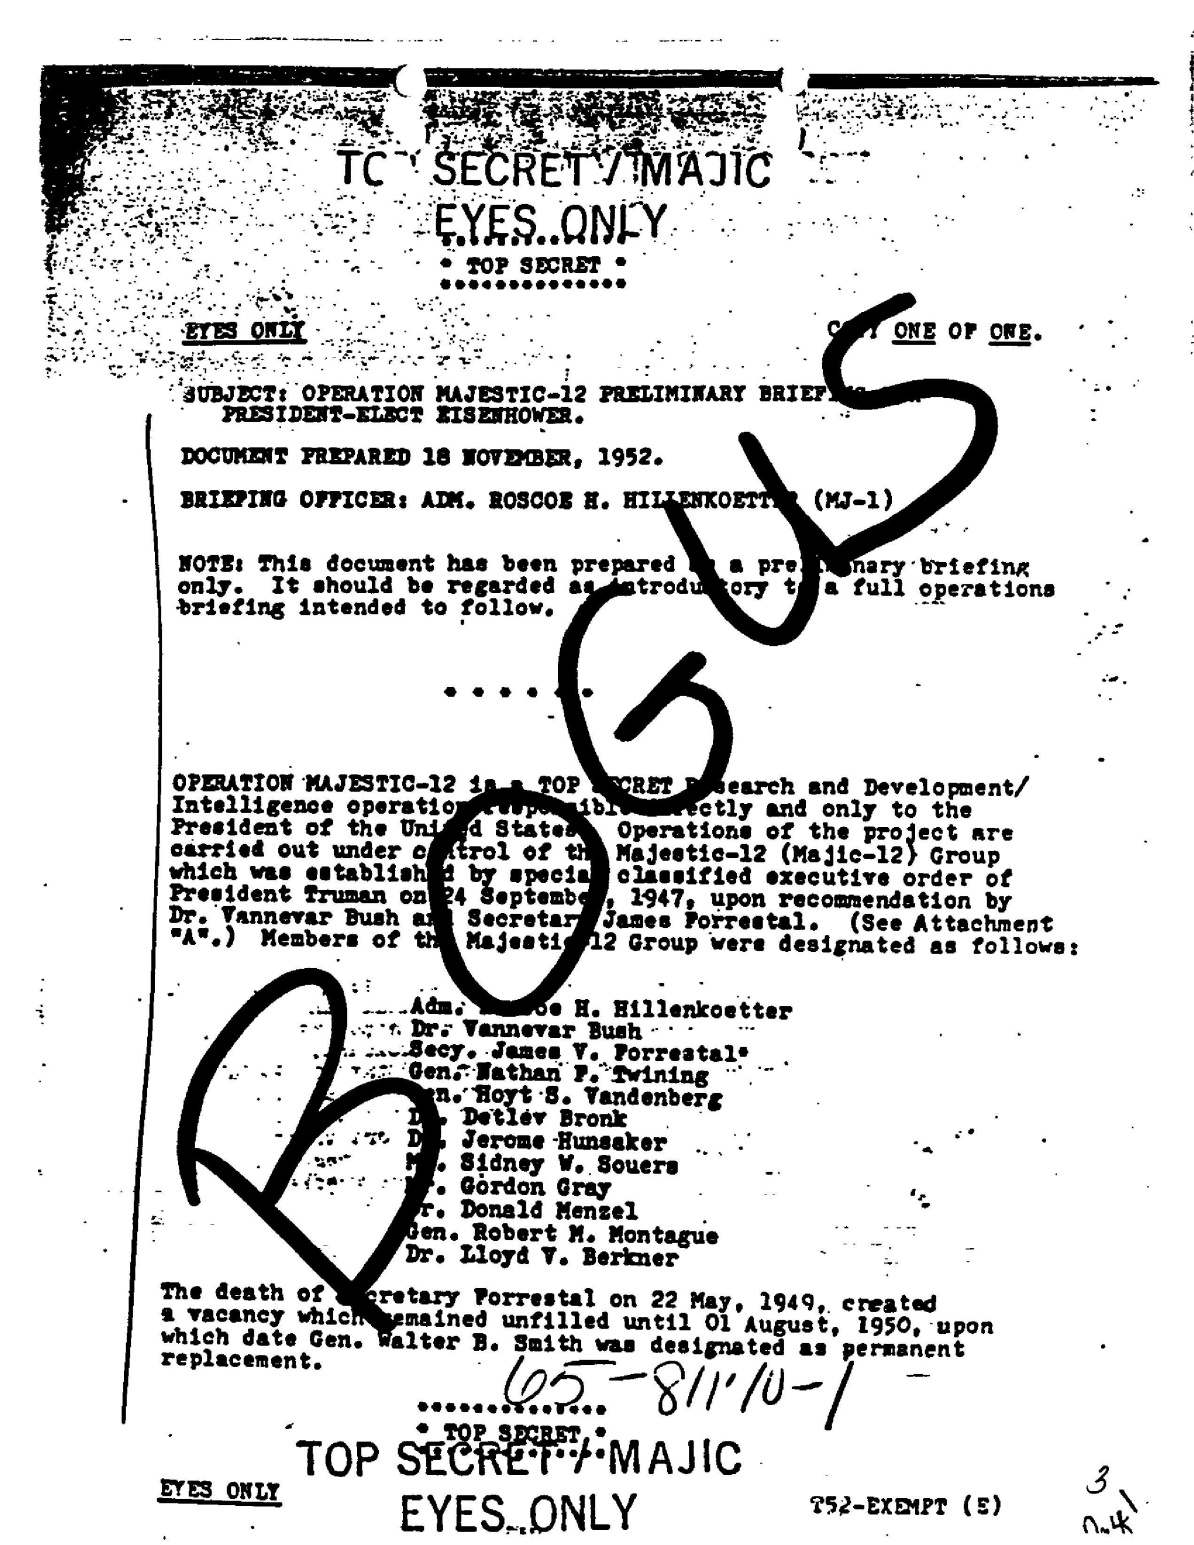 Majestic 12 In 1988, two FBI offices received similar versions of a memo titled “Operation Majestic-12…” claiming to be highly classified government document. The memo appeared to be a briefing for newly-elected President Eisenhower on a secret committee created to exploit a recovery of an extra-terrestrial aircraft and cover-up this work from public examination. An Air Force investigation determined the document to be a fake.